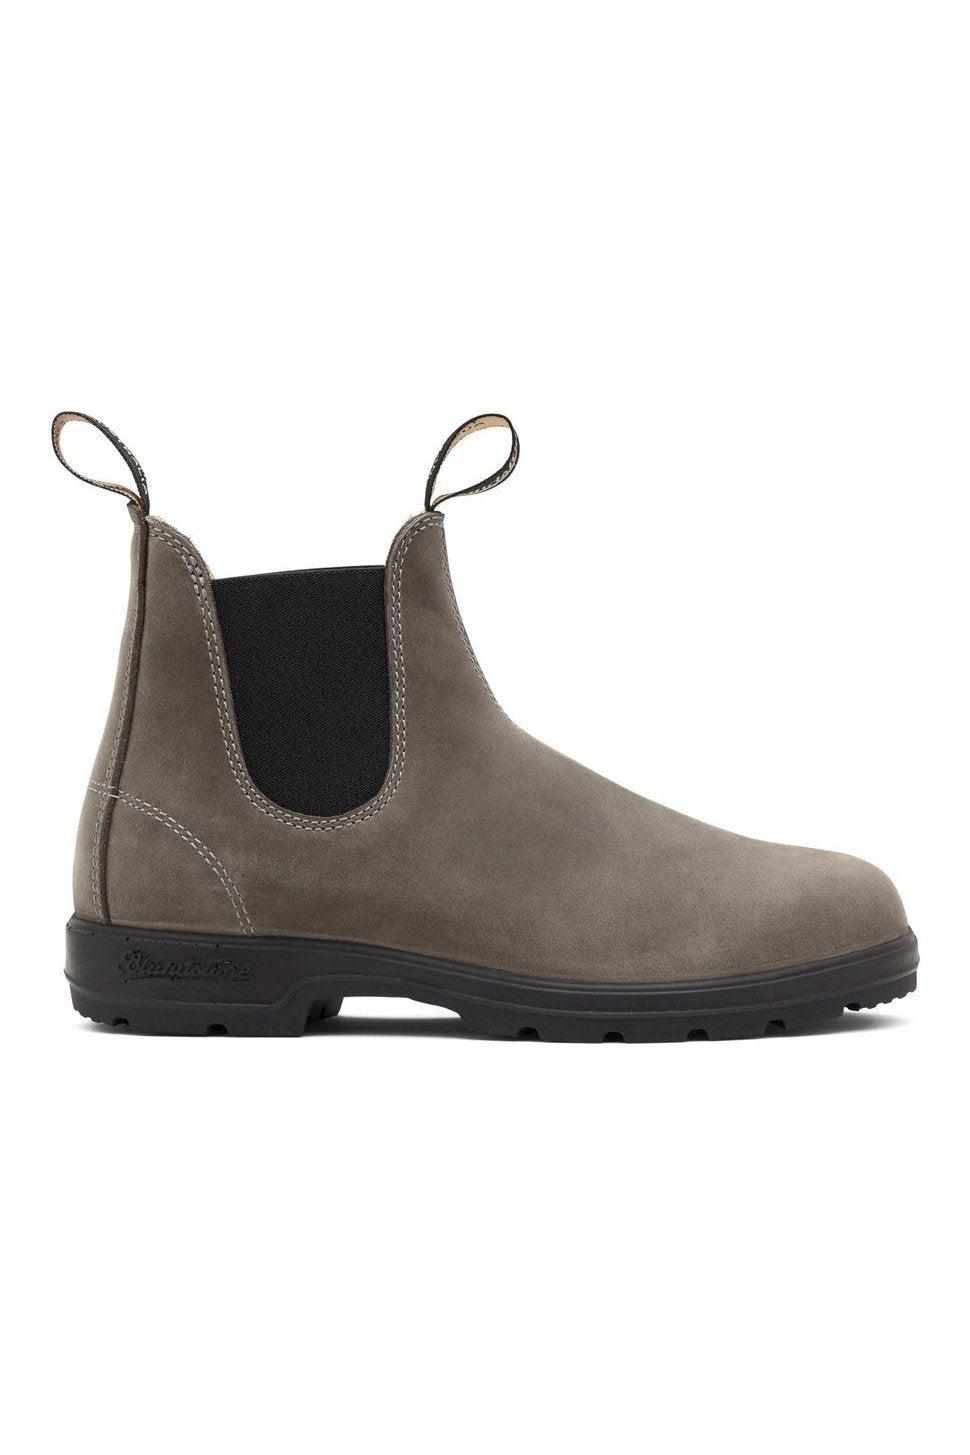 BLUNDSTONE 1469 *SALE-Discontinued* This sale price is not compatible with any other offer.